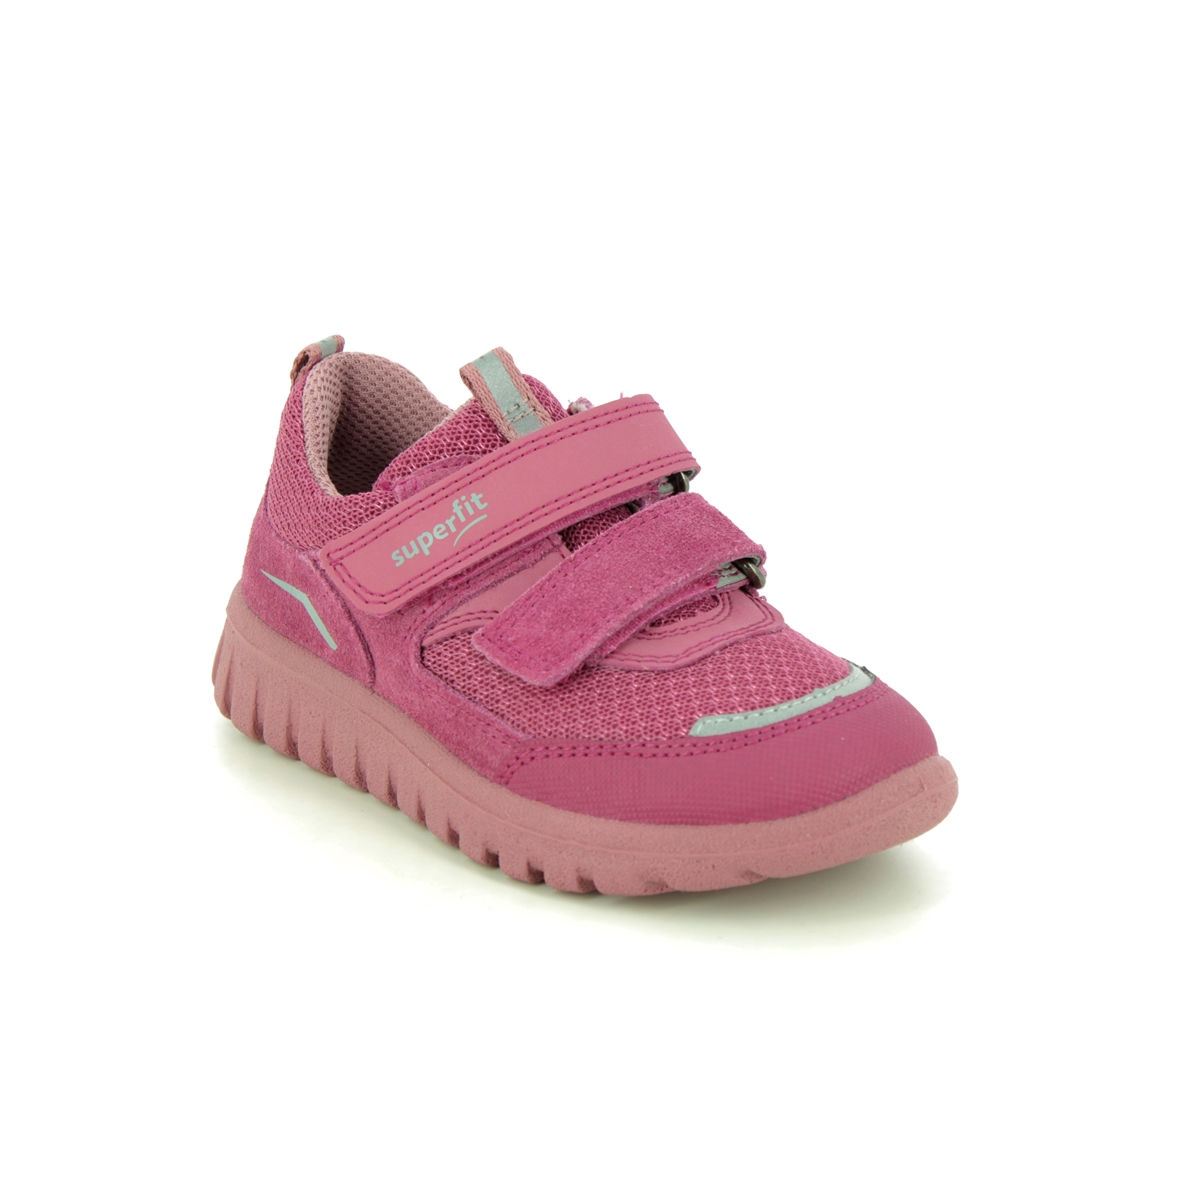 Superfit Sport7 Mini 2V Hot Pink Kids Girls Trainers 1006194-5520 In Size 22 In Plain Hot Pink For kids